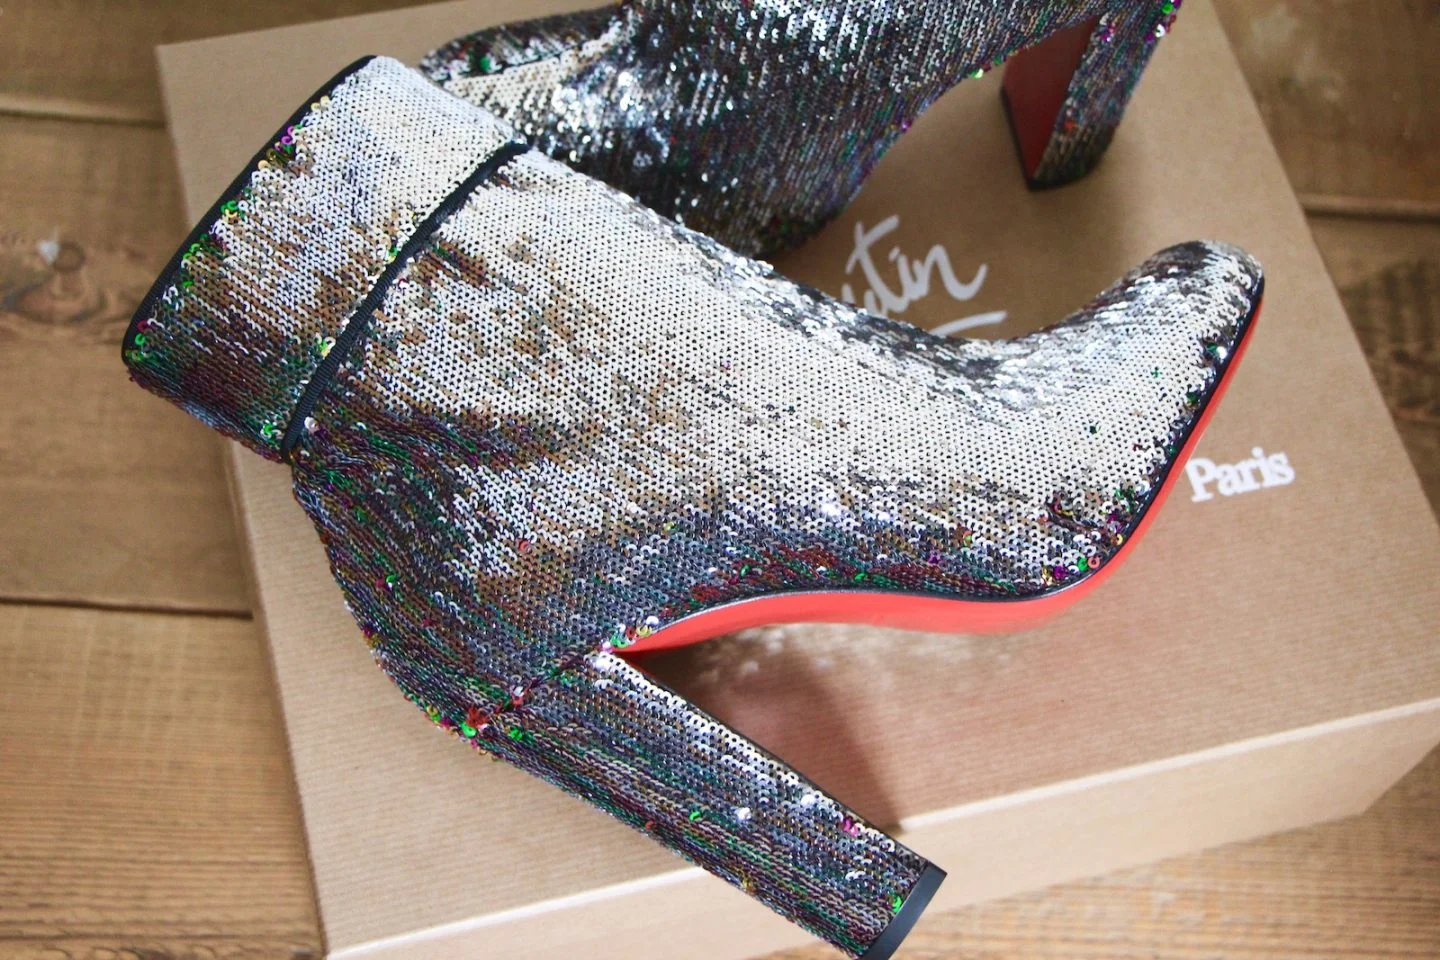 Christian Louboutin Moulamax 100 Sequin Boots